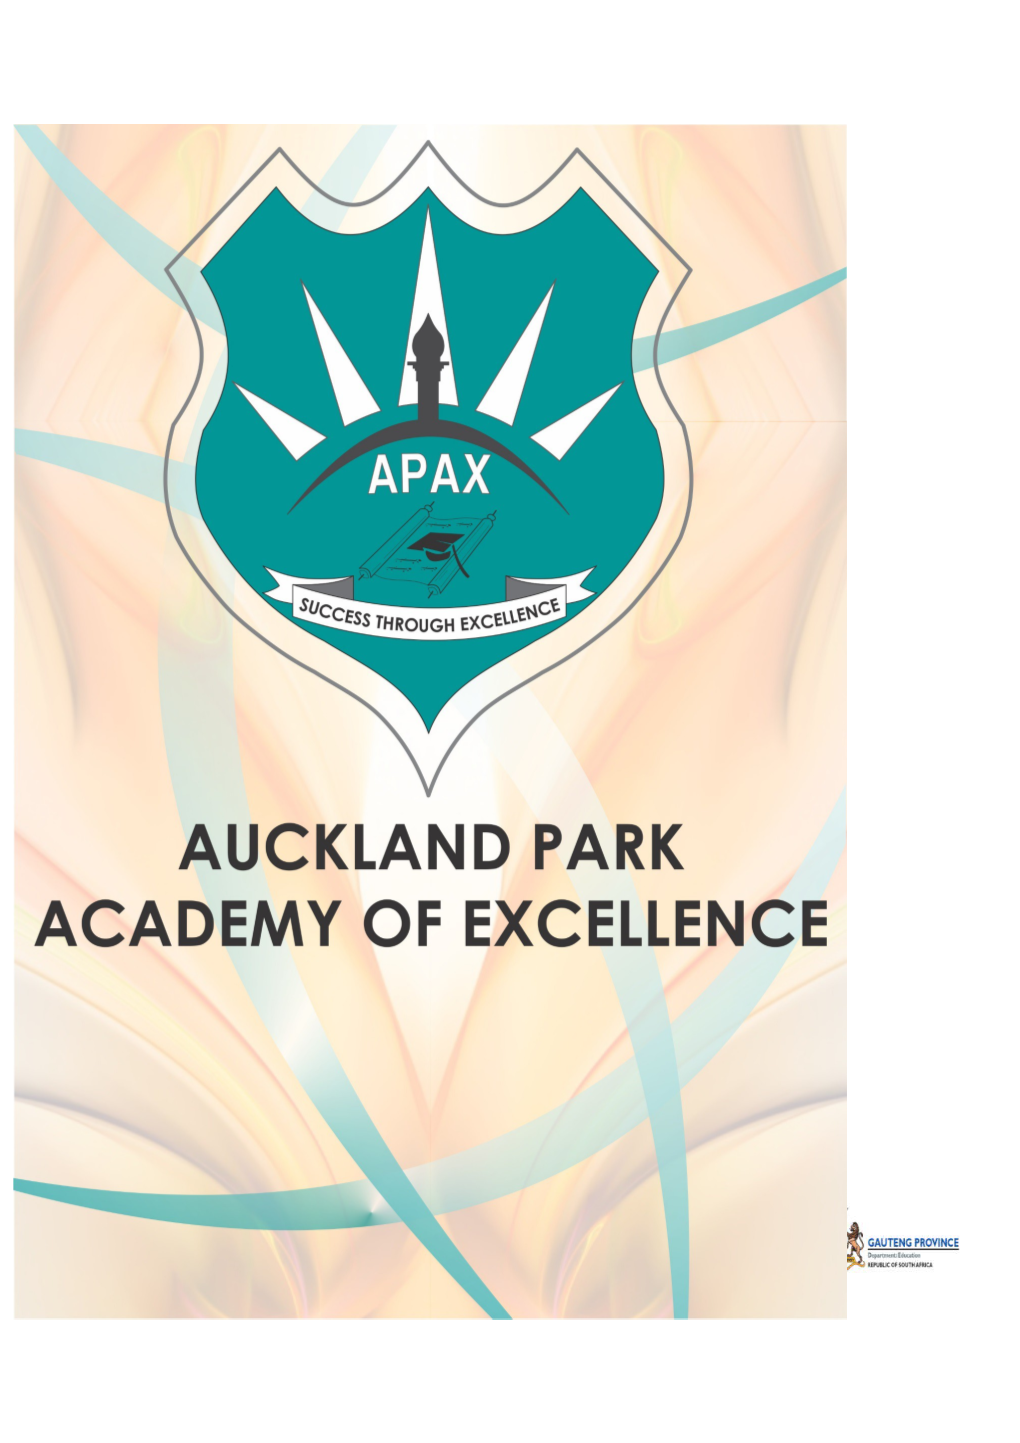 Policy for Recruitment of Staff at APAX